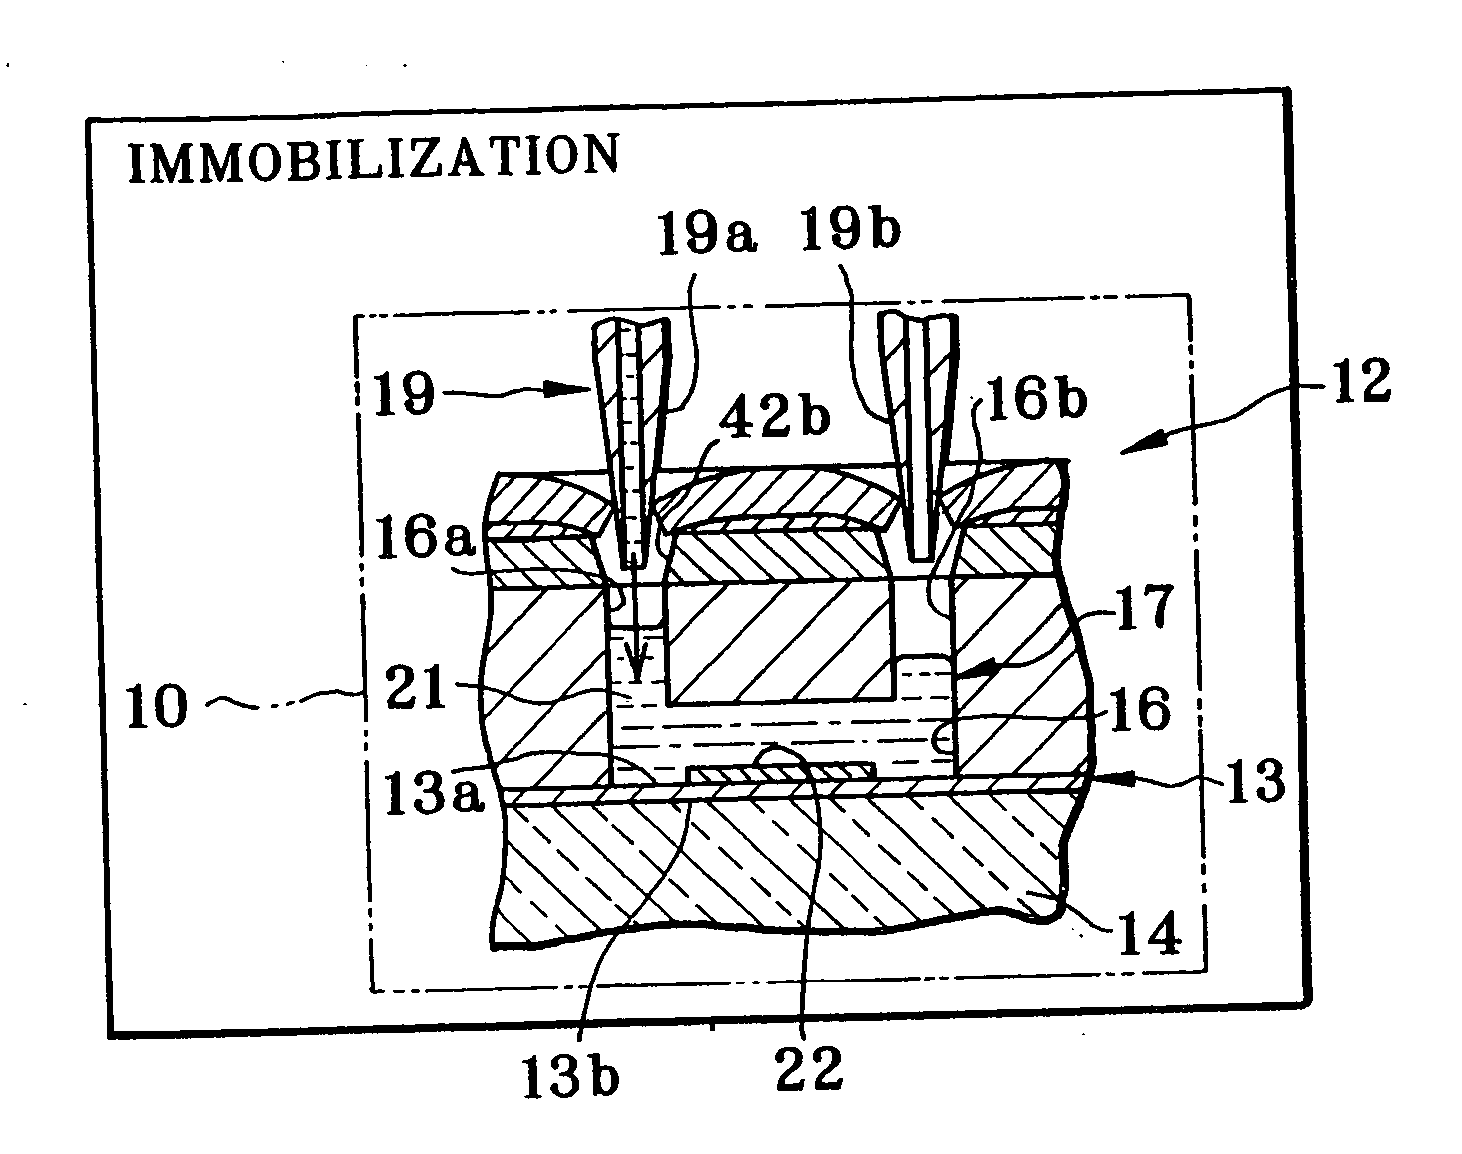 Apparatus for assay in utilizing attenuated total reflection